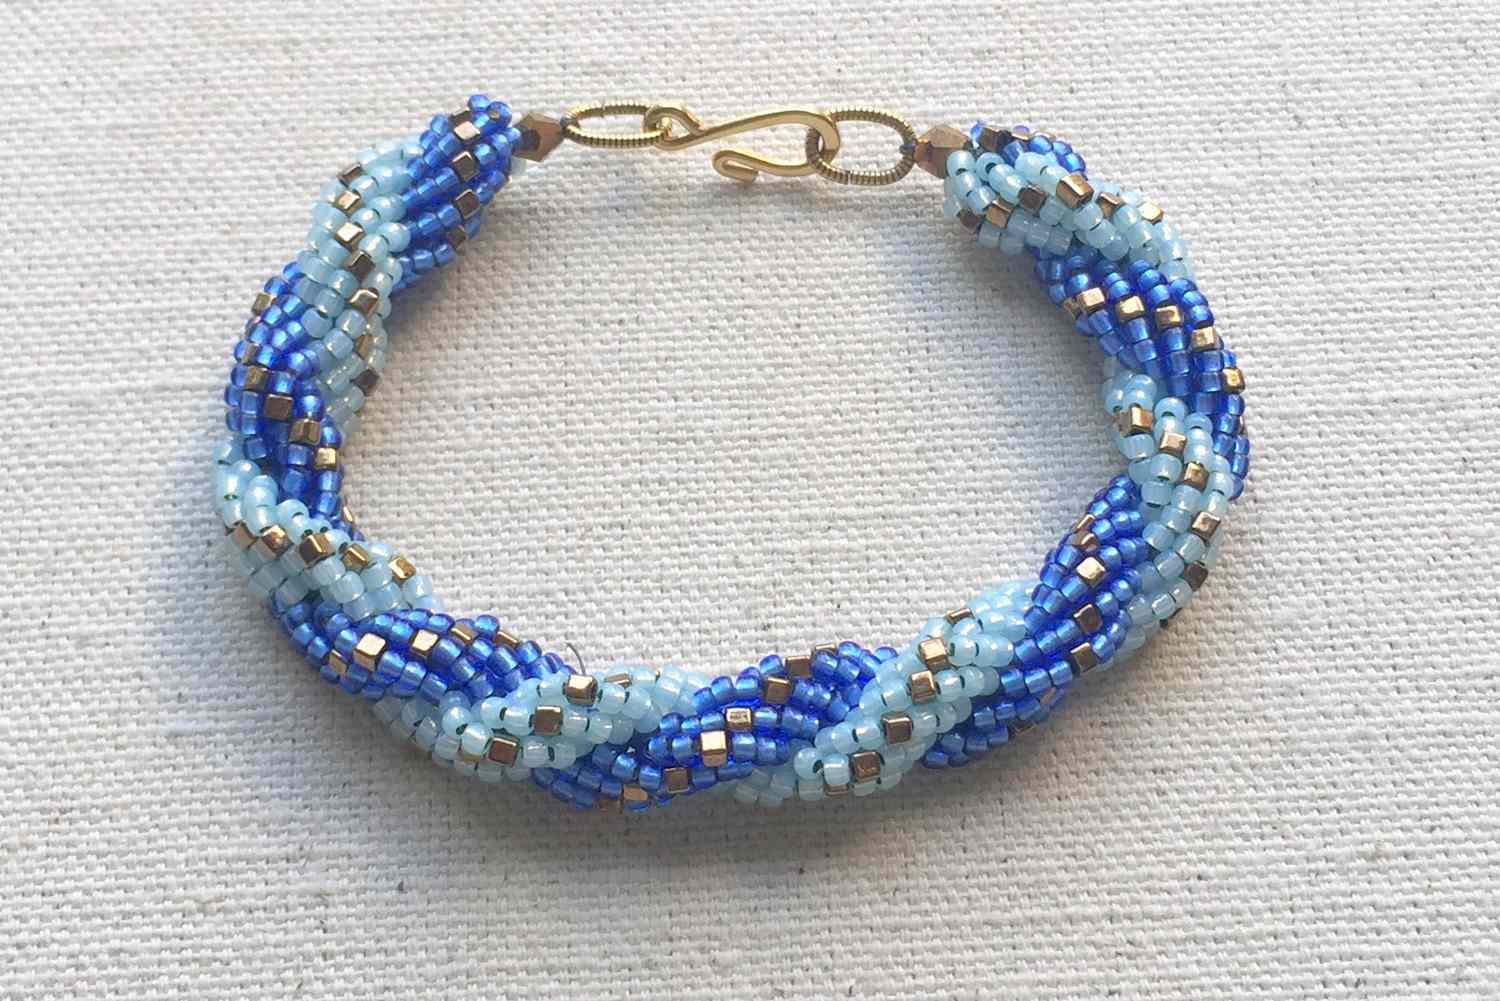 Beaded Delights: Adding Color and Texture to Your Everyday Look